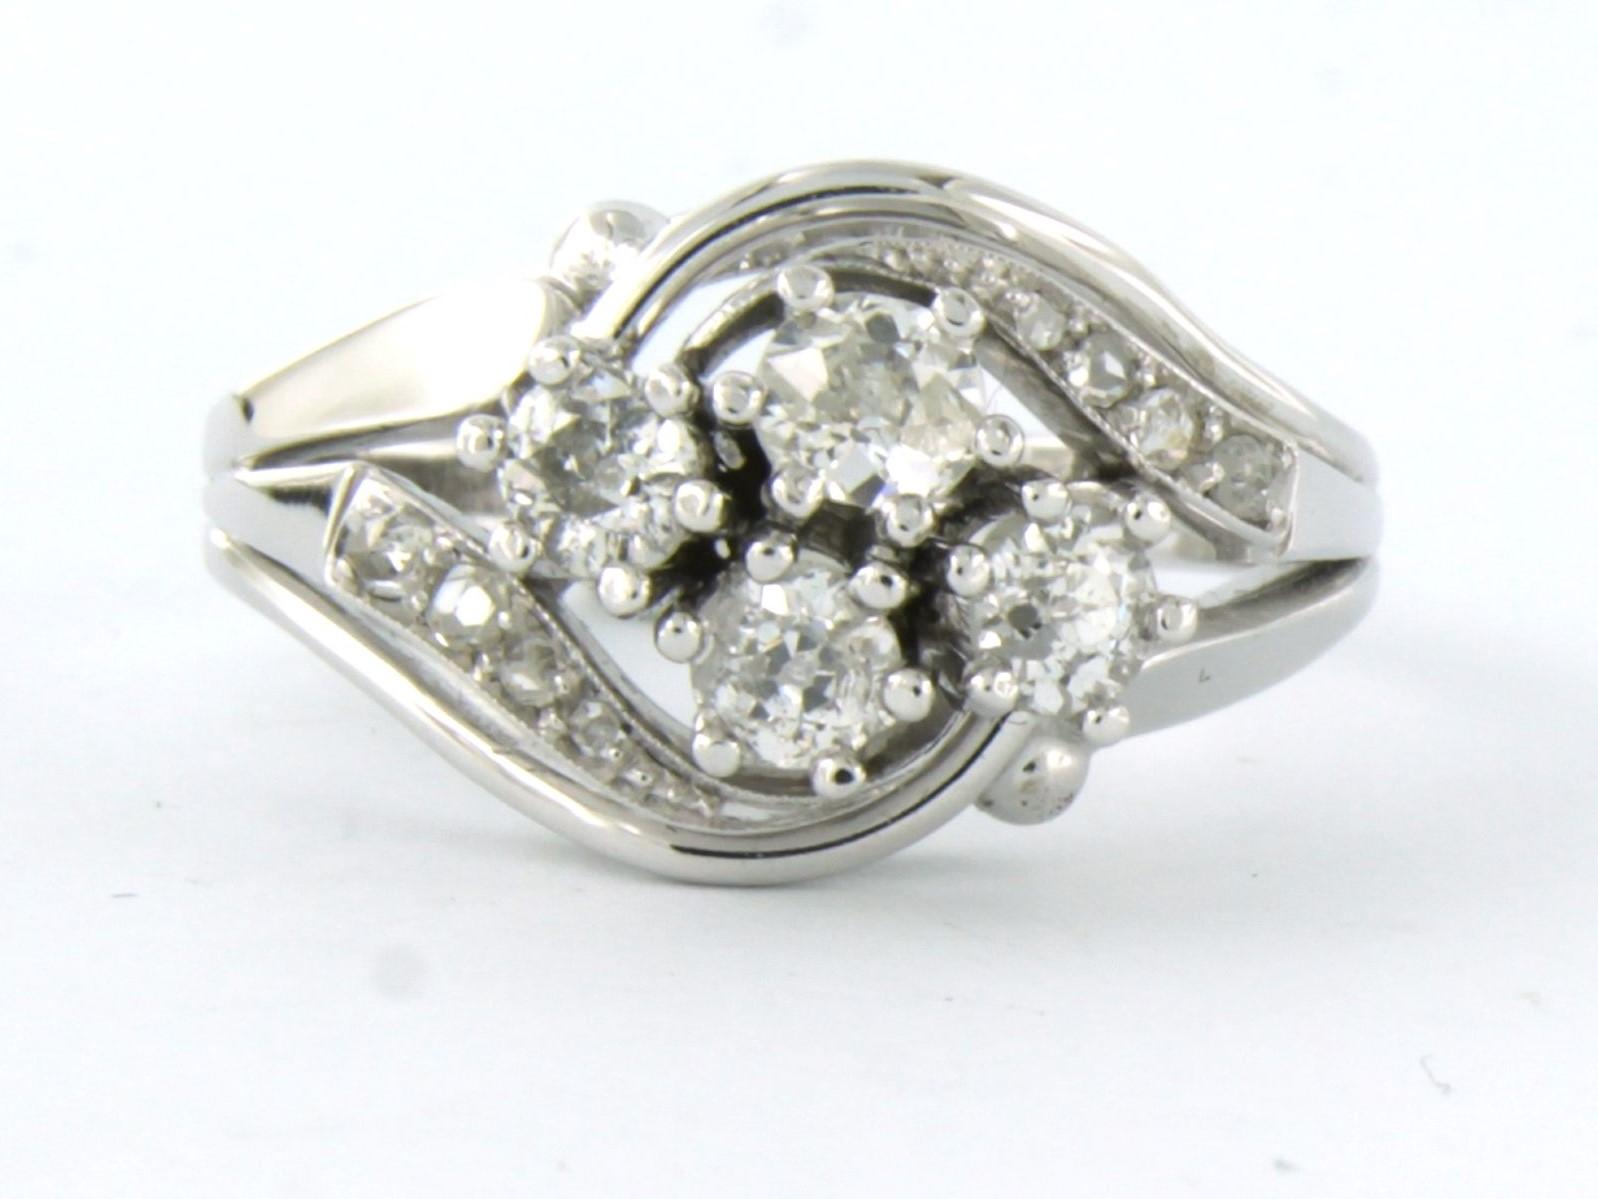 14k white gold ring set with old mine cut diamonds and single cut diamonds, up to 1.00ct - F/G - VS/SI - ring size U.S. 7.5 - EU. 17.75(56)

detailed description:

the front of the ring is 1.2 cm wide and 7.3 mm high

weight: 6.2 grams

ring size